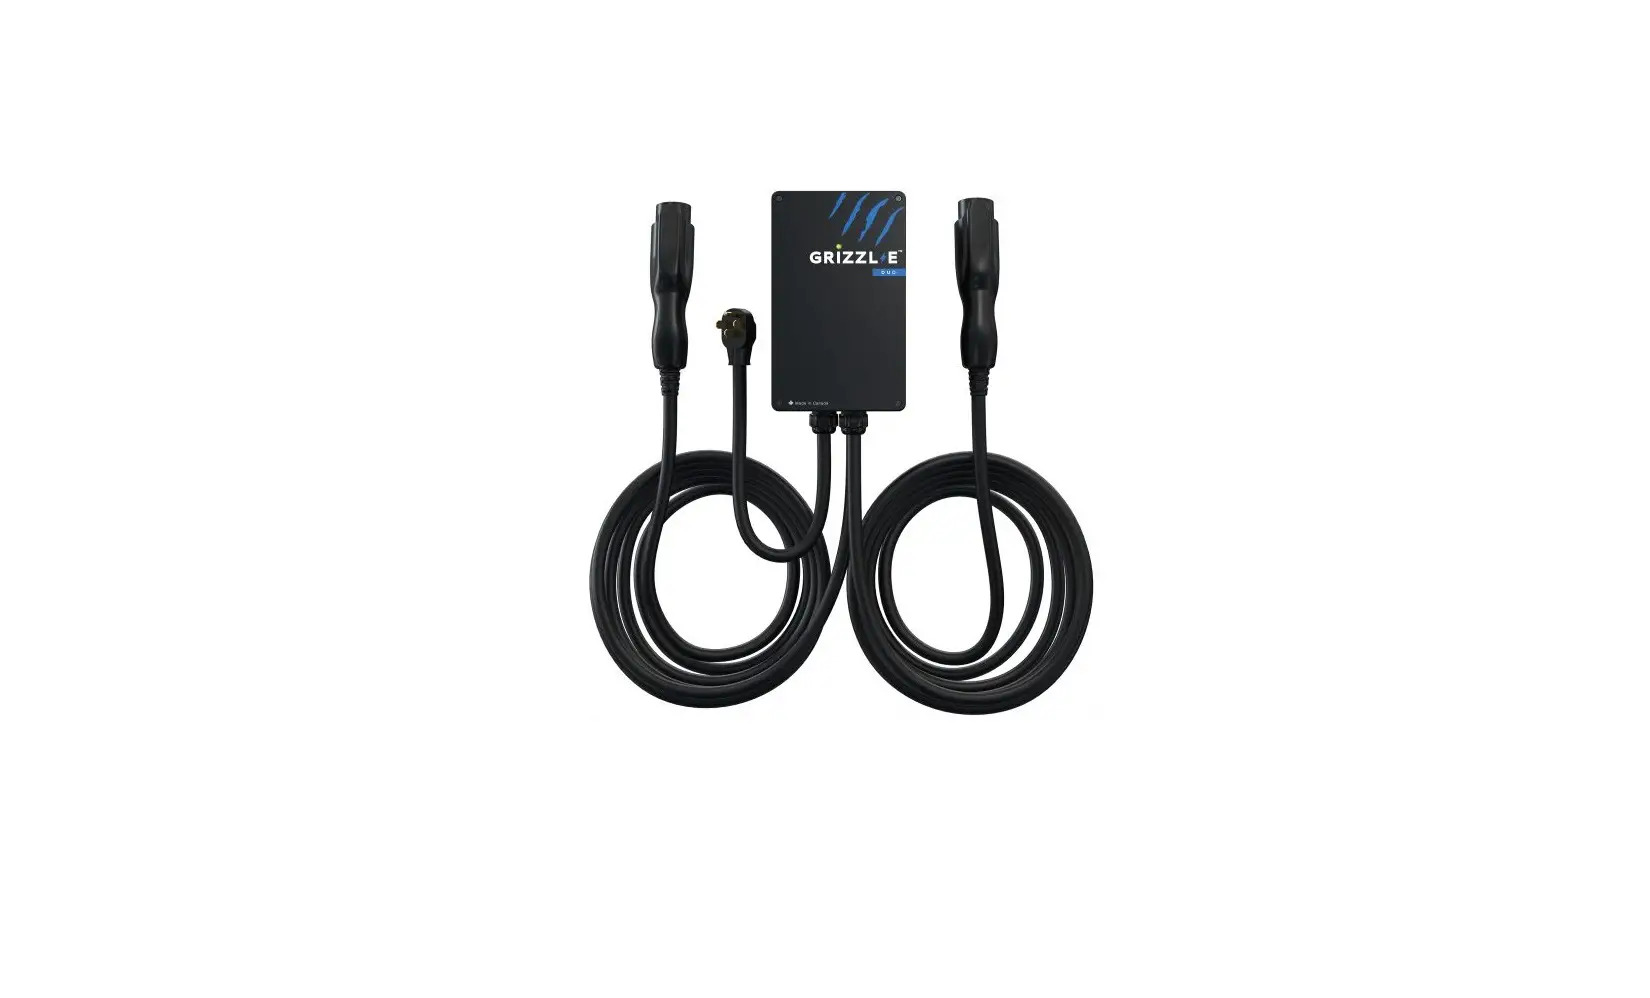 GRIZZL-E DUO EV Charger